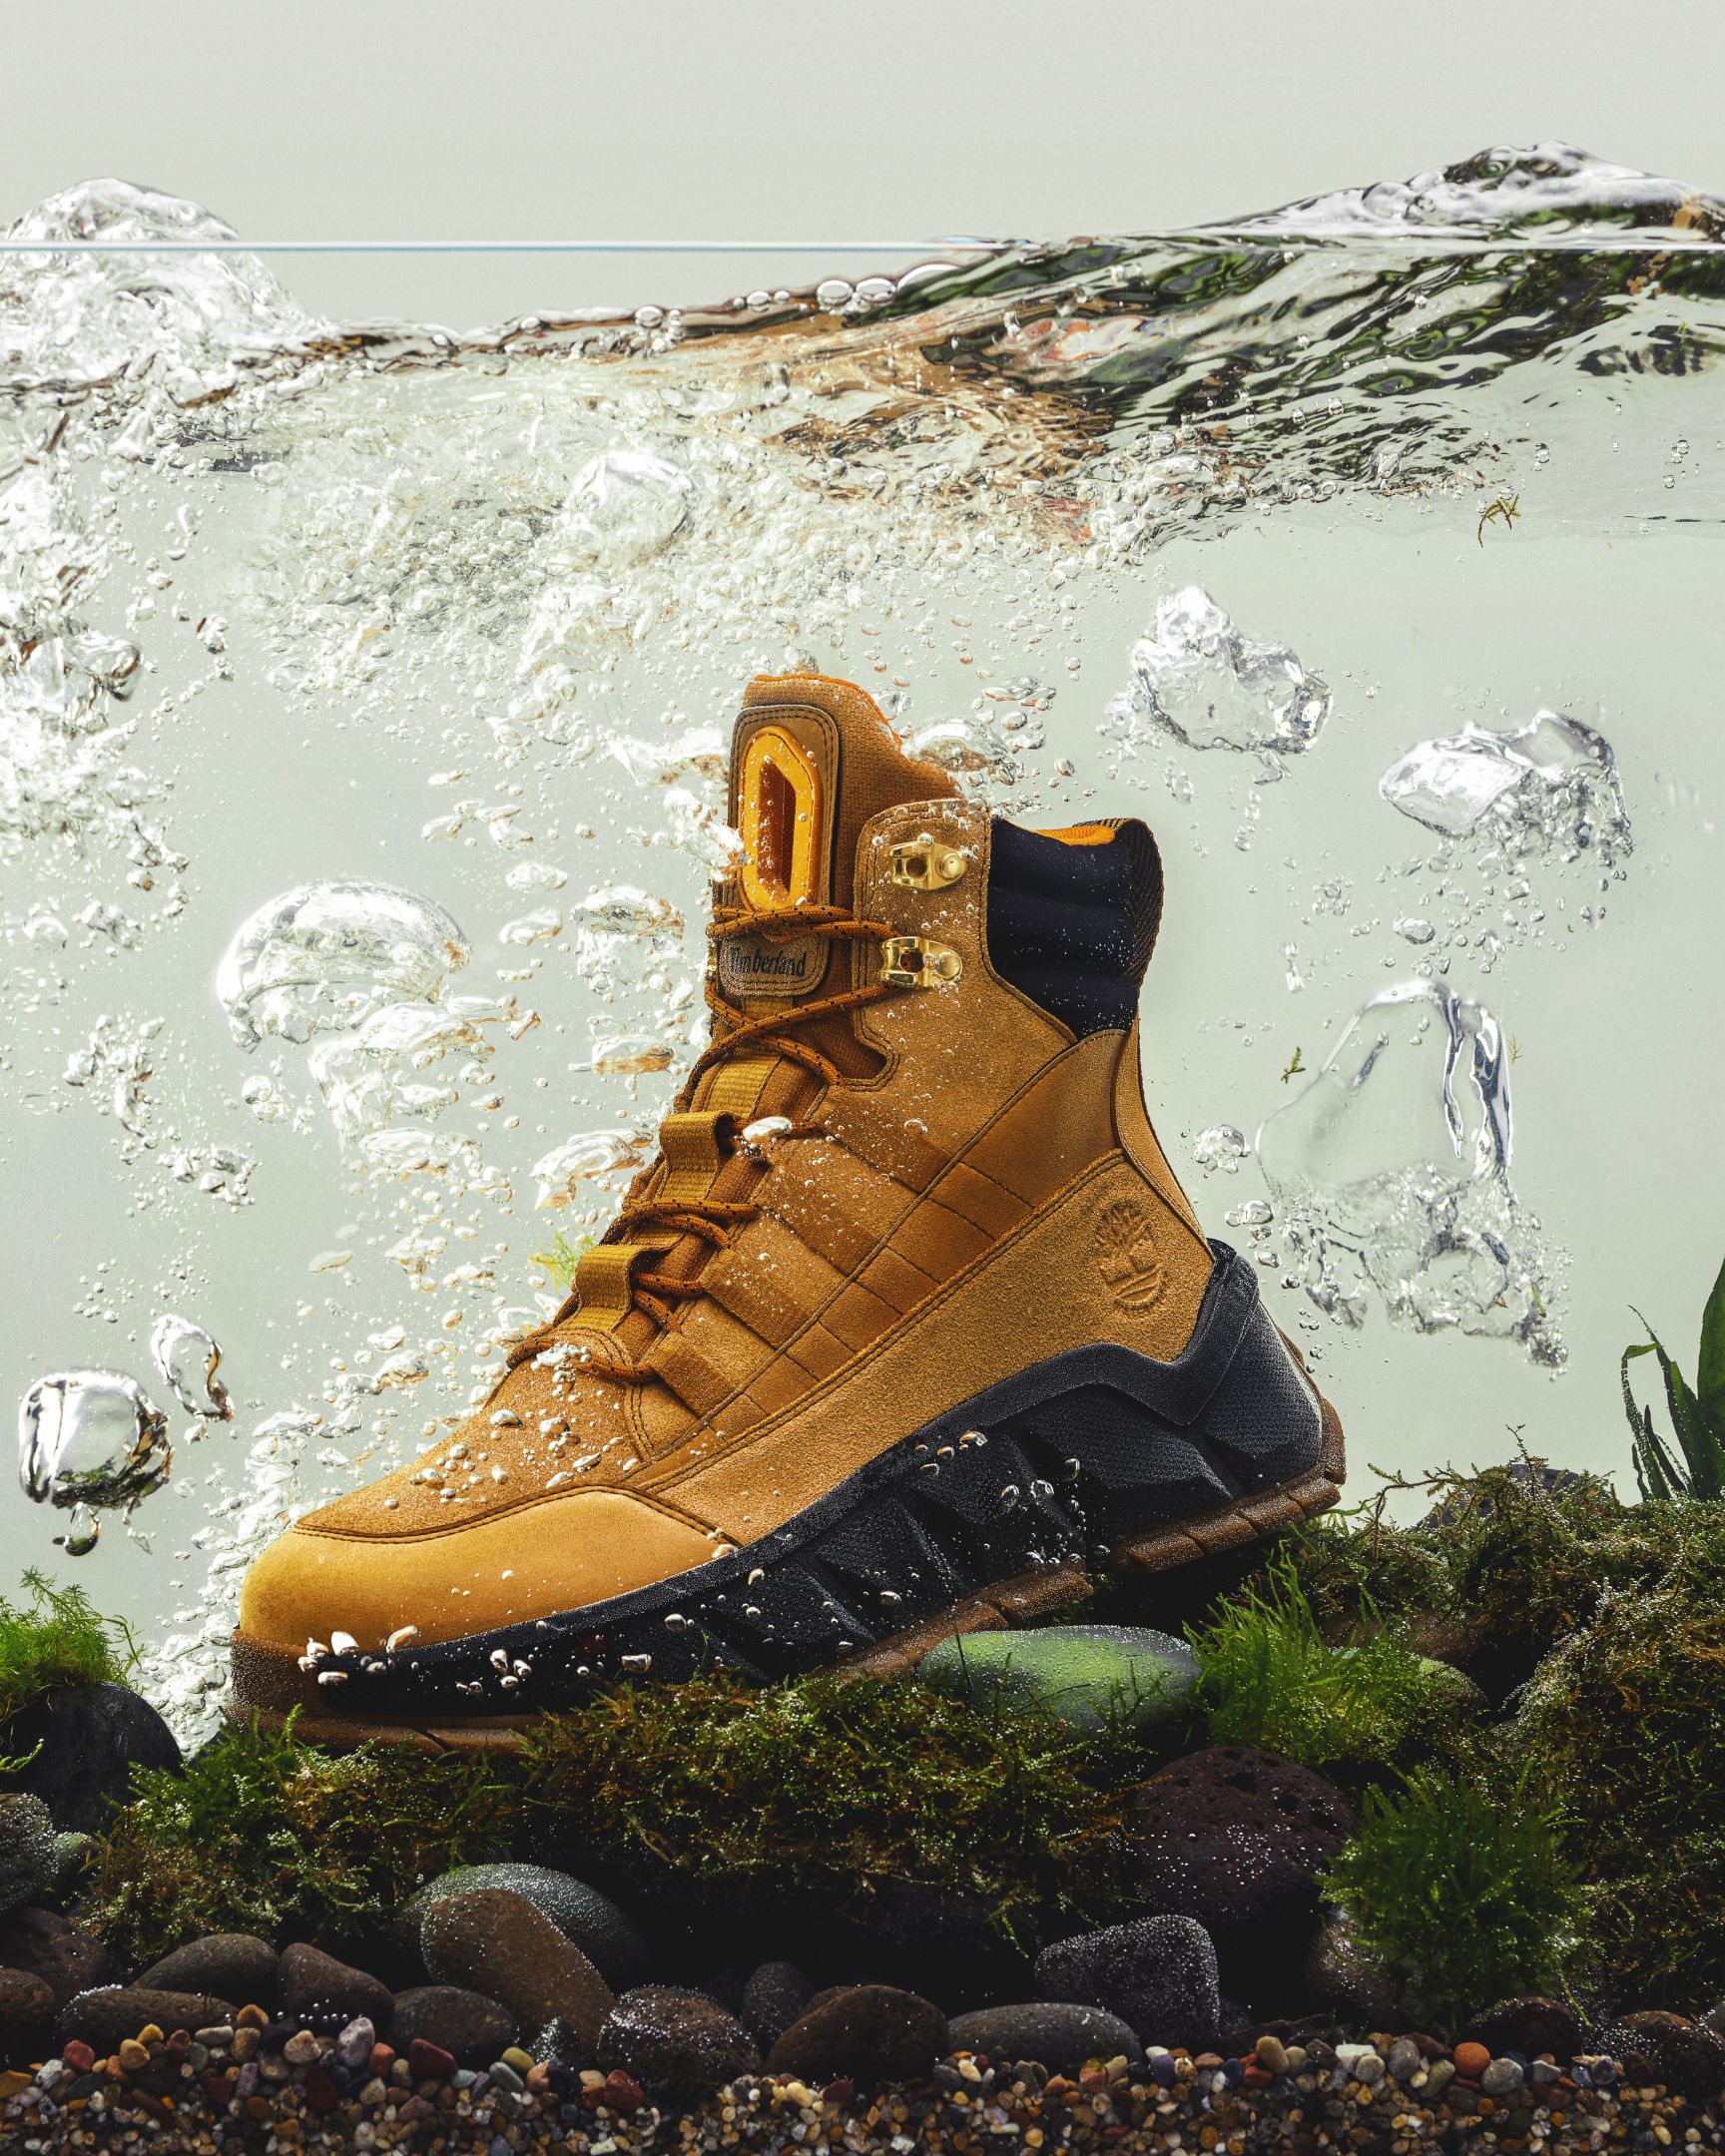 Timberland Greenstride Turbo TBL boot submerged in water tank with rocks and plants